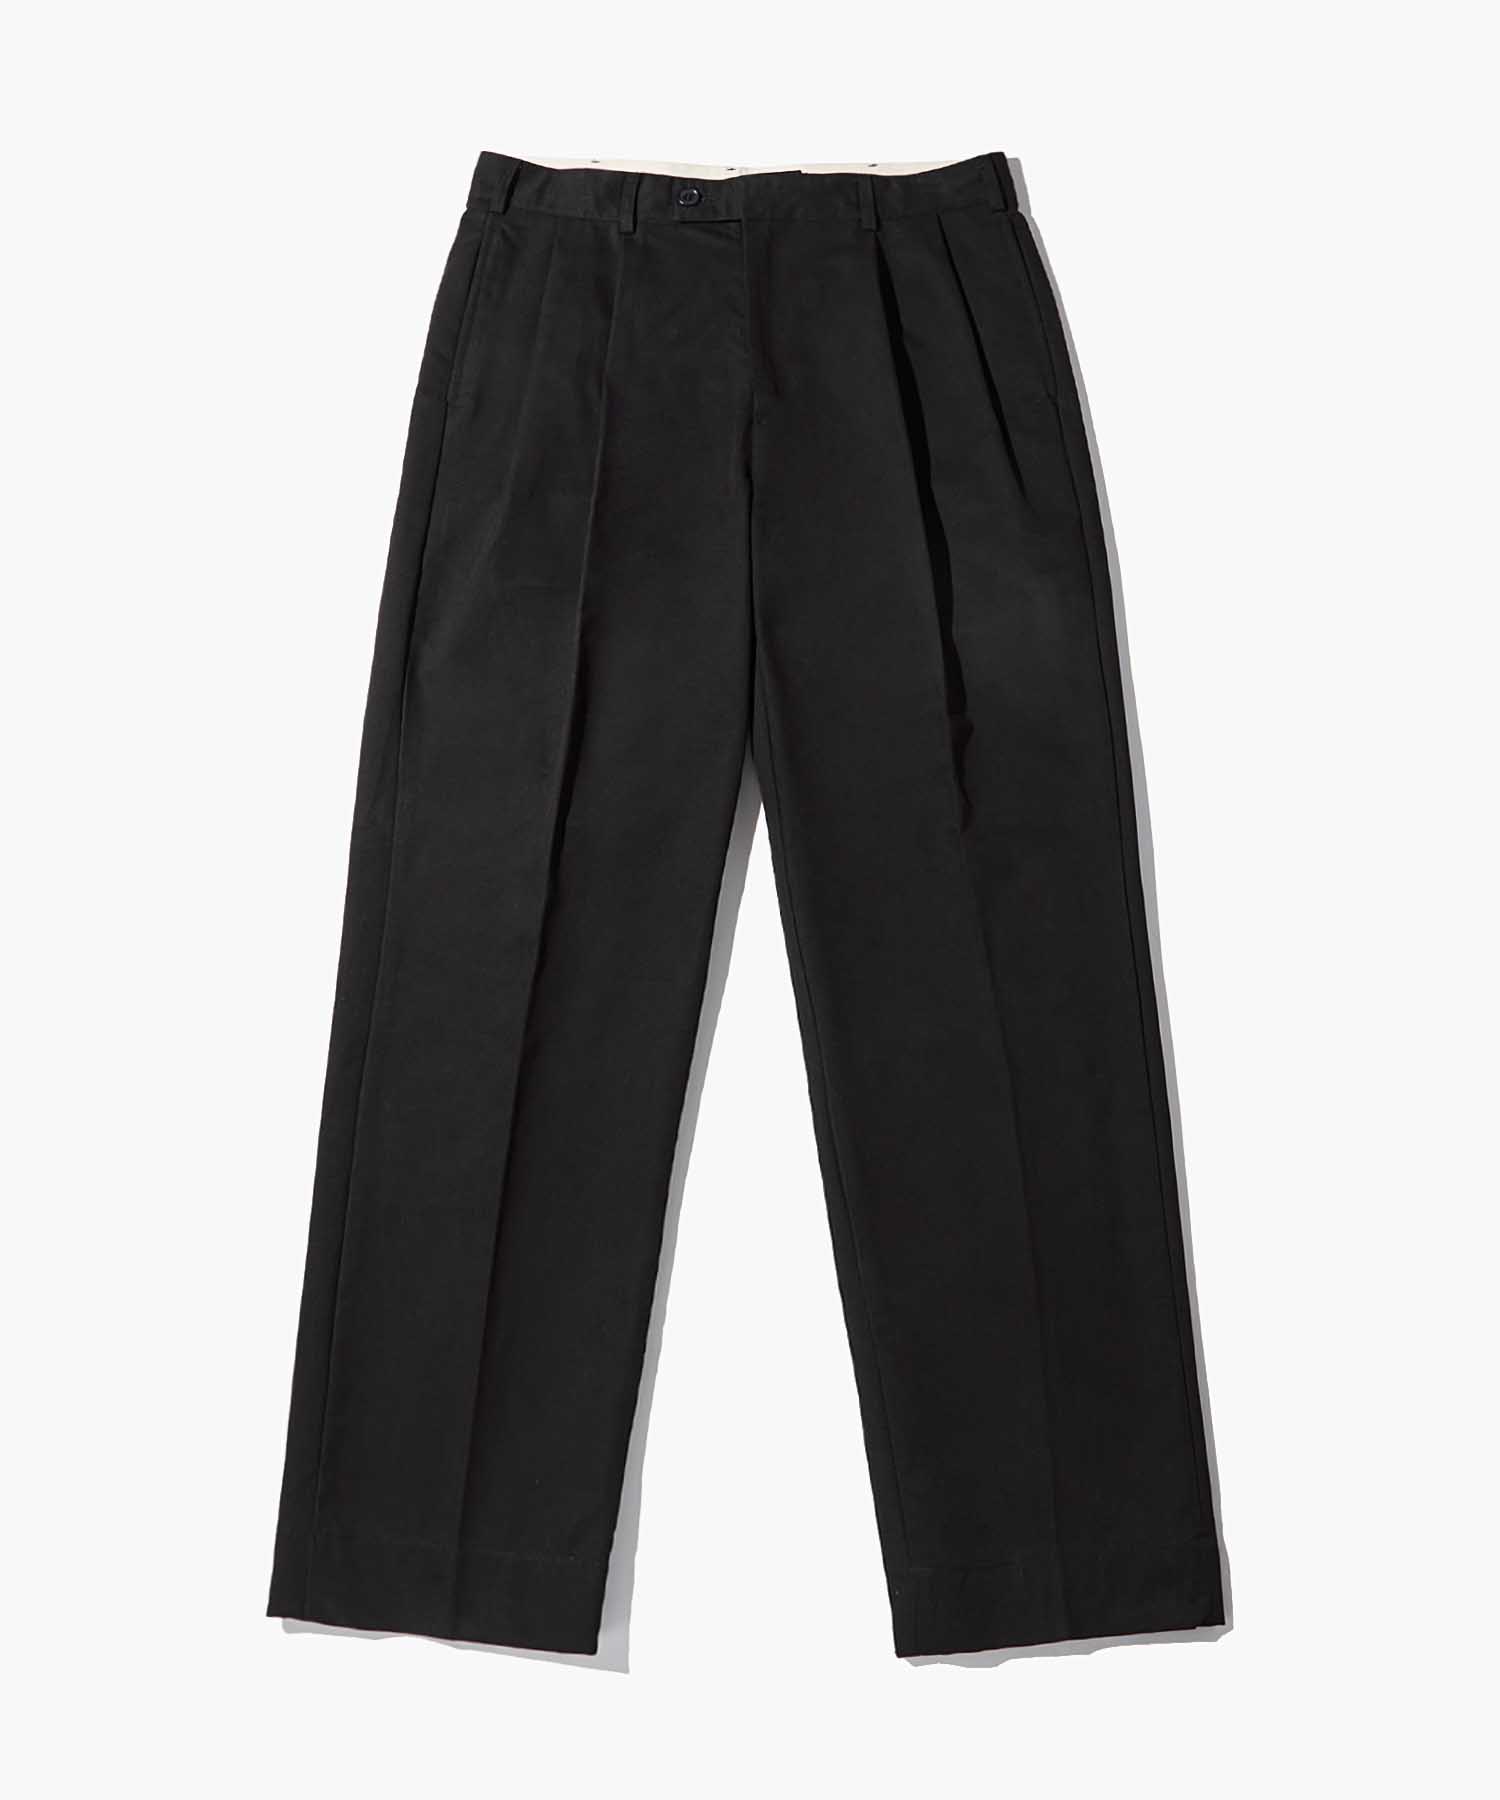 WIDE TWO TUCK CHINO PANTS_BLACK